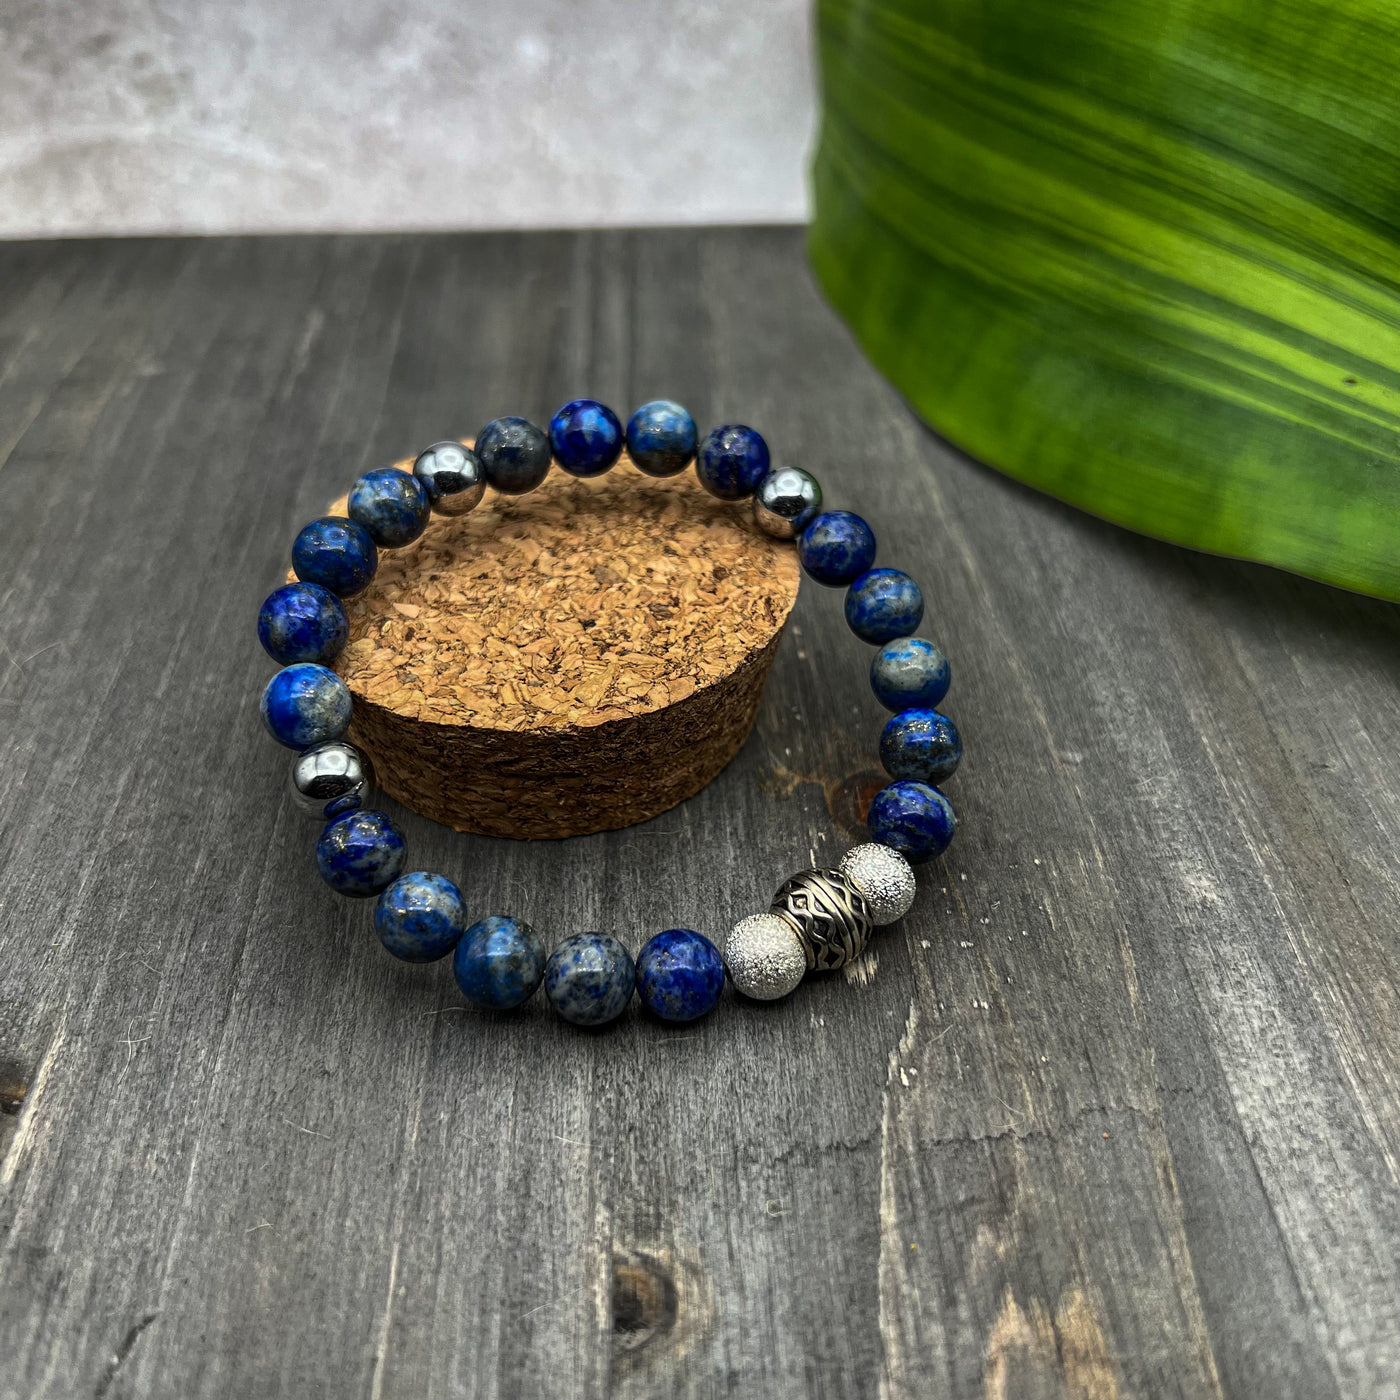 Lapis Lazuli Stone Bracelet for Men with Om Silver Charm by Talisa